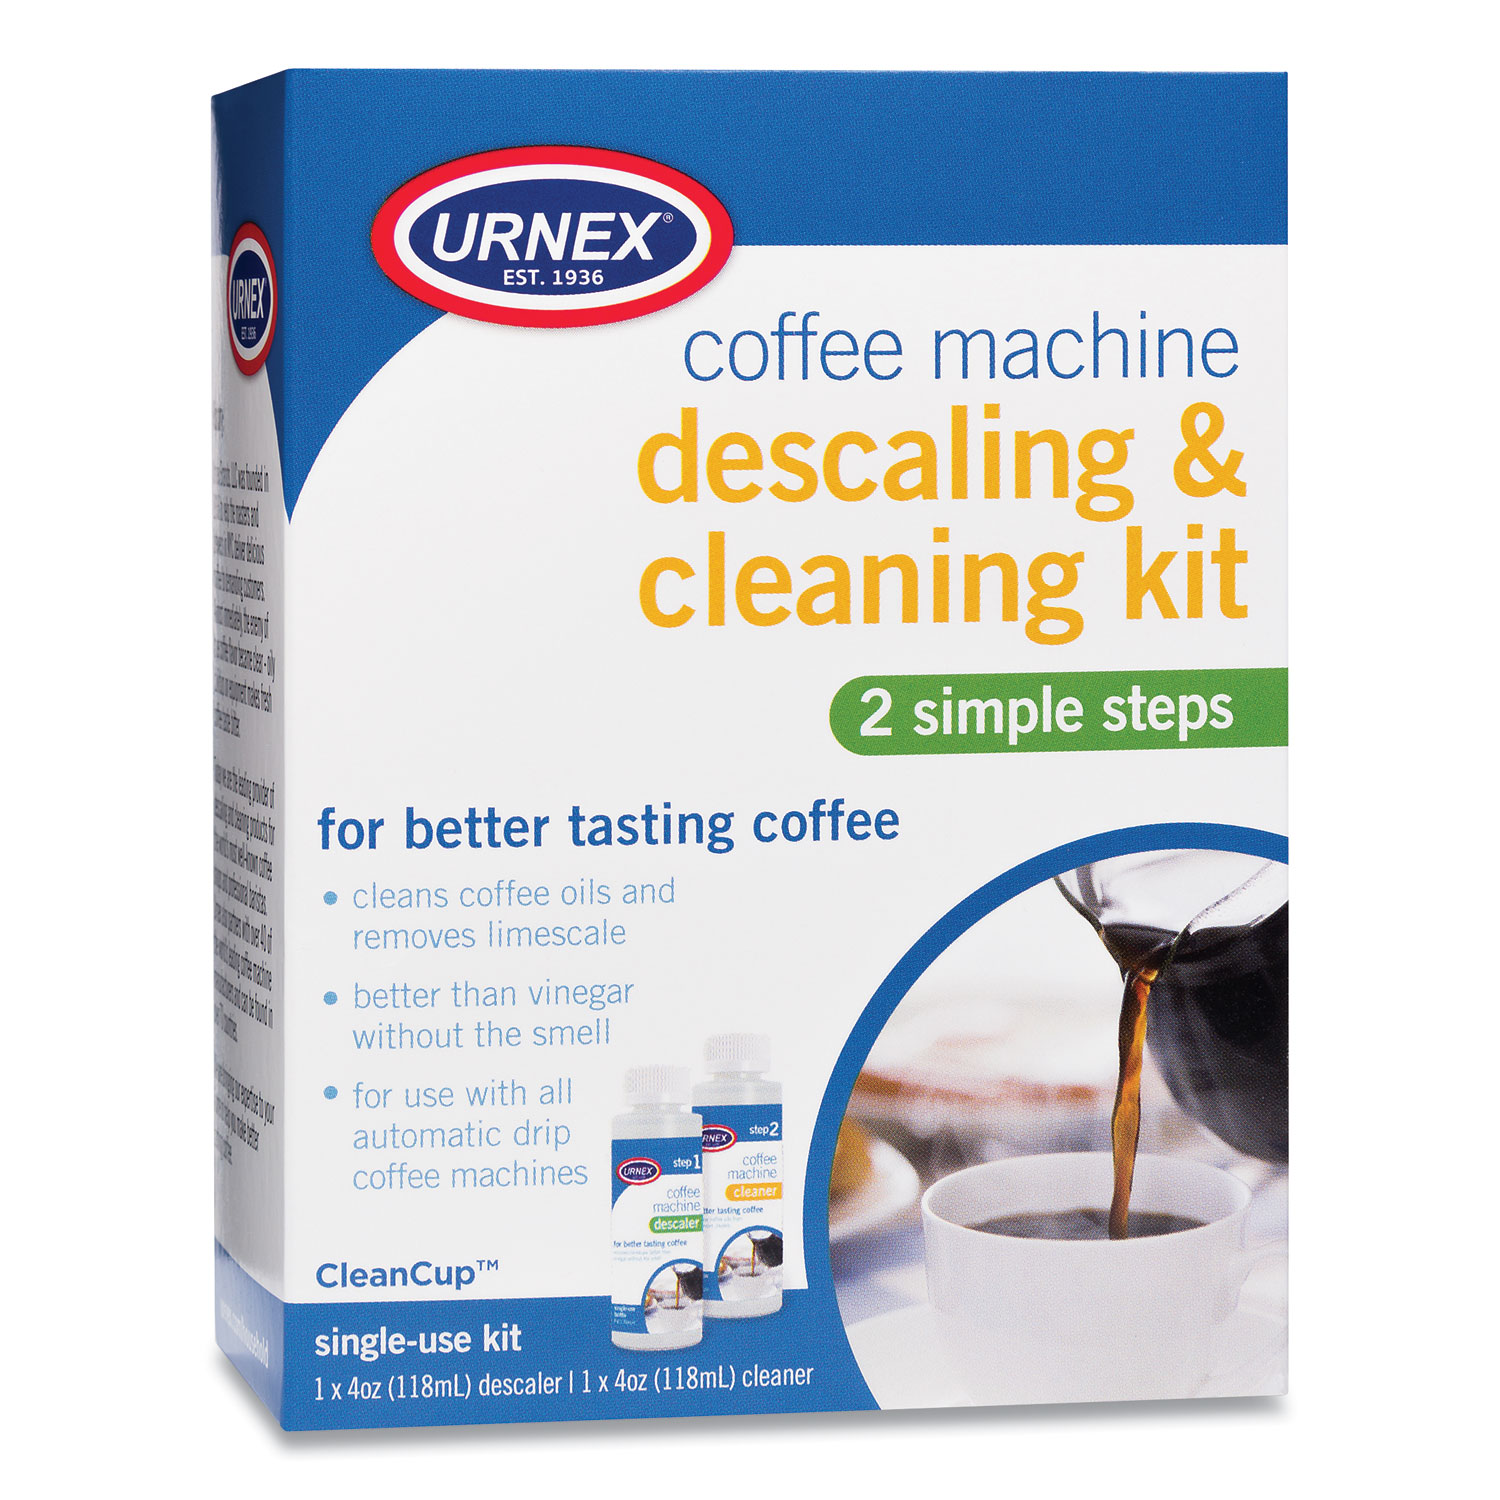 Urnex® Coffee Machine Descaling and Cleaning Kit, 4 oz Descaler and 4 oz Cleaner